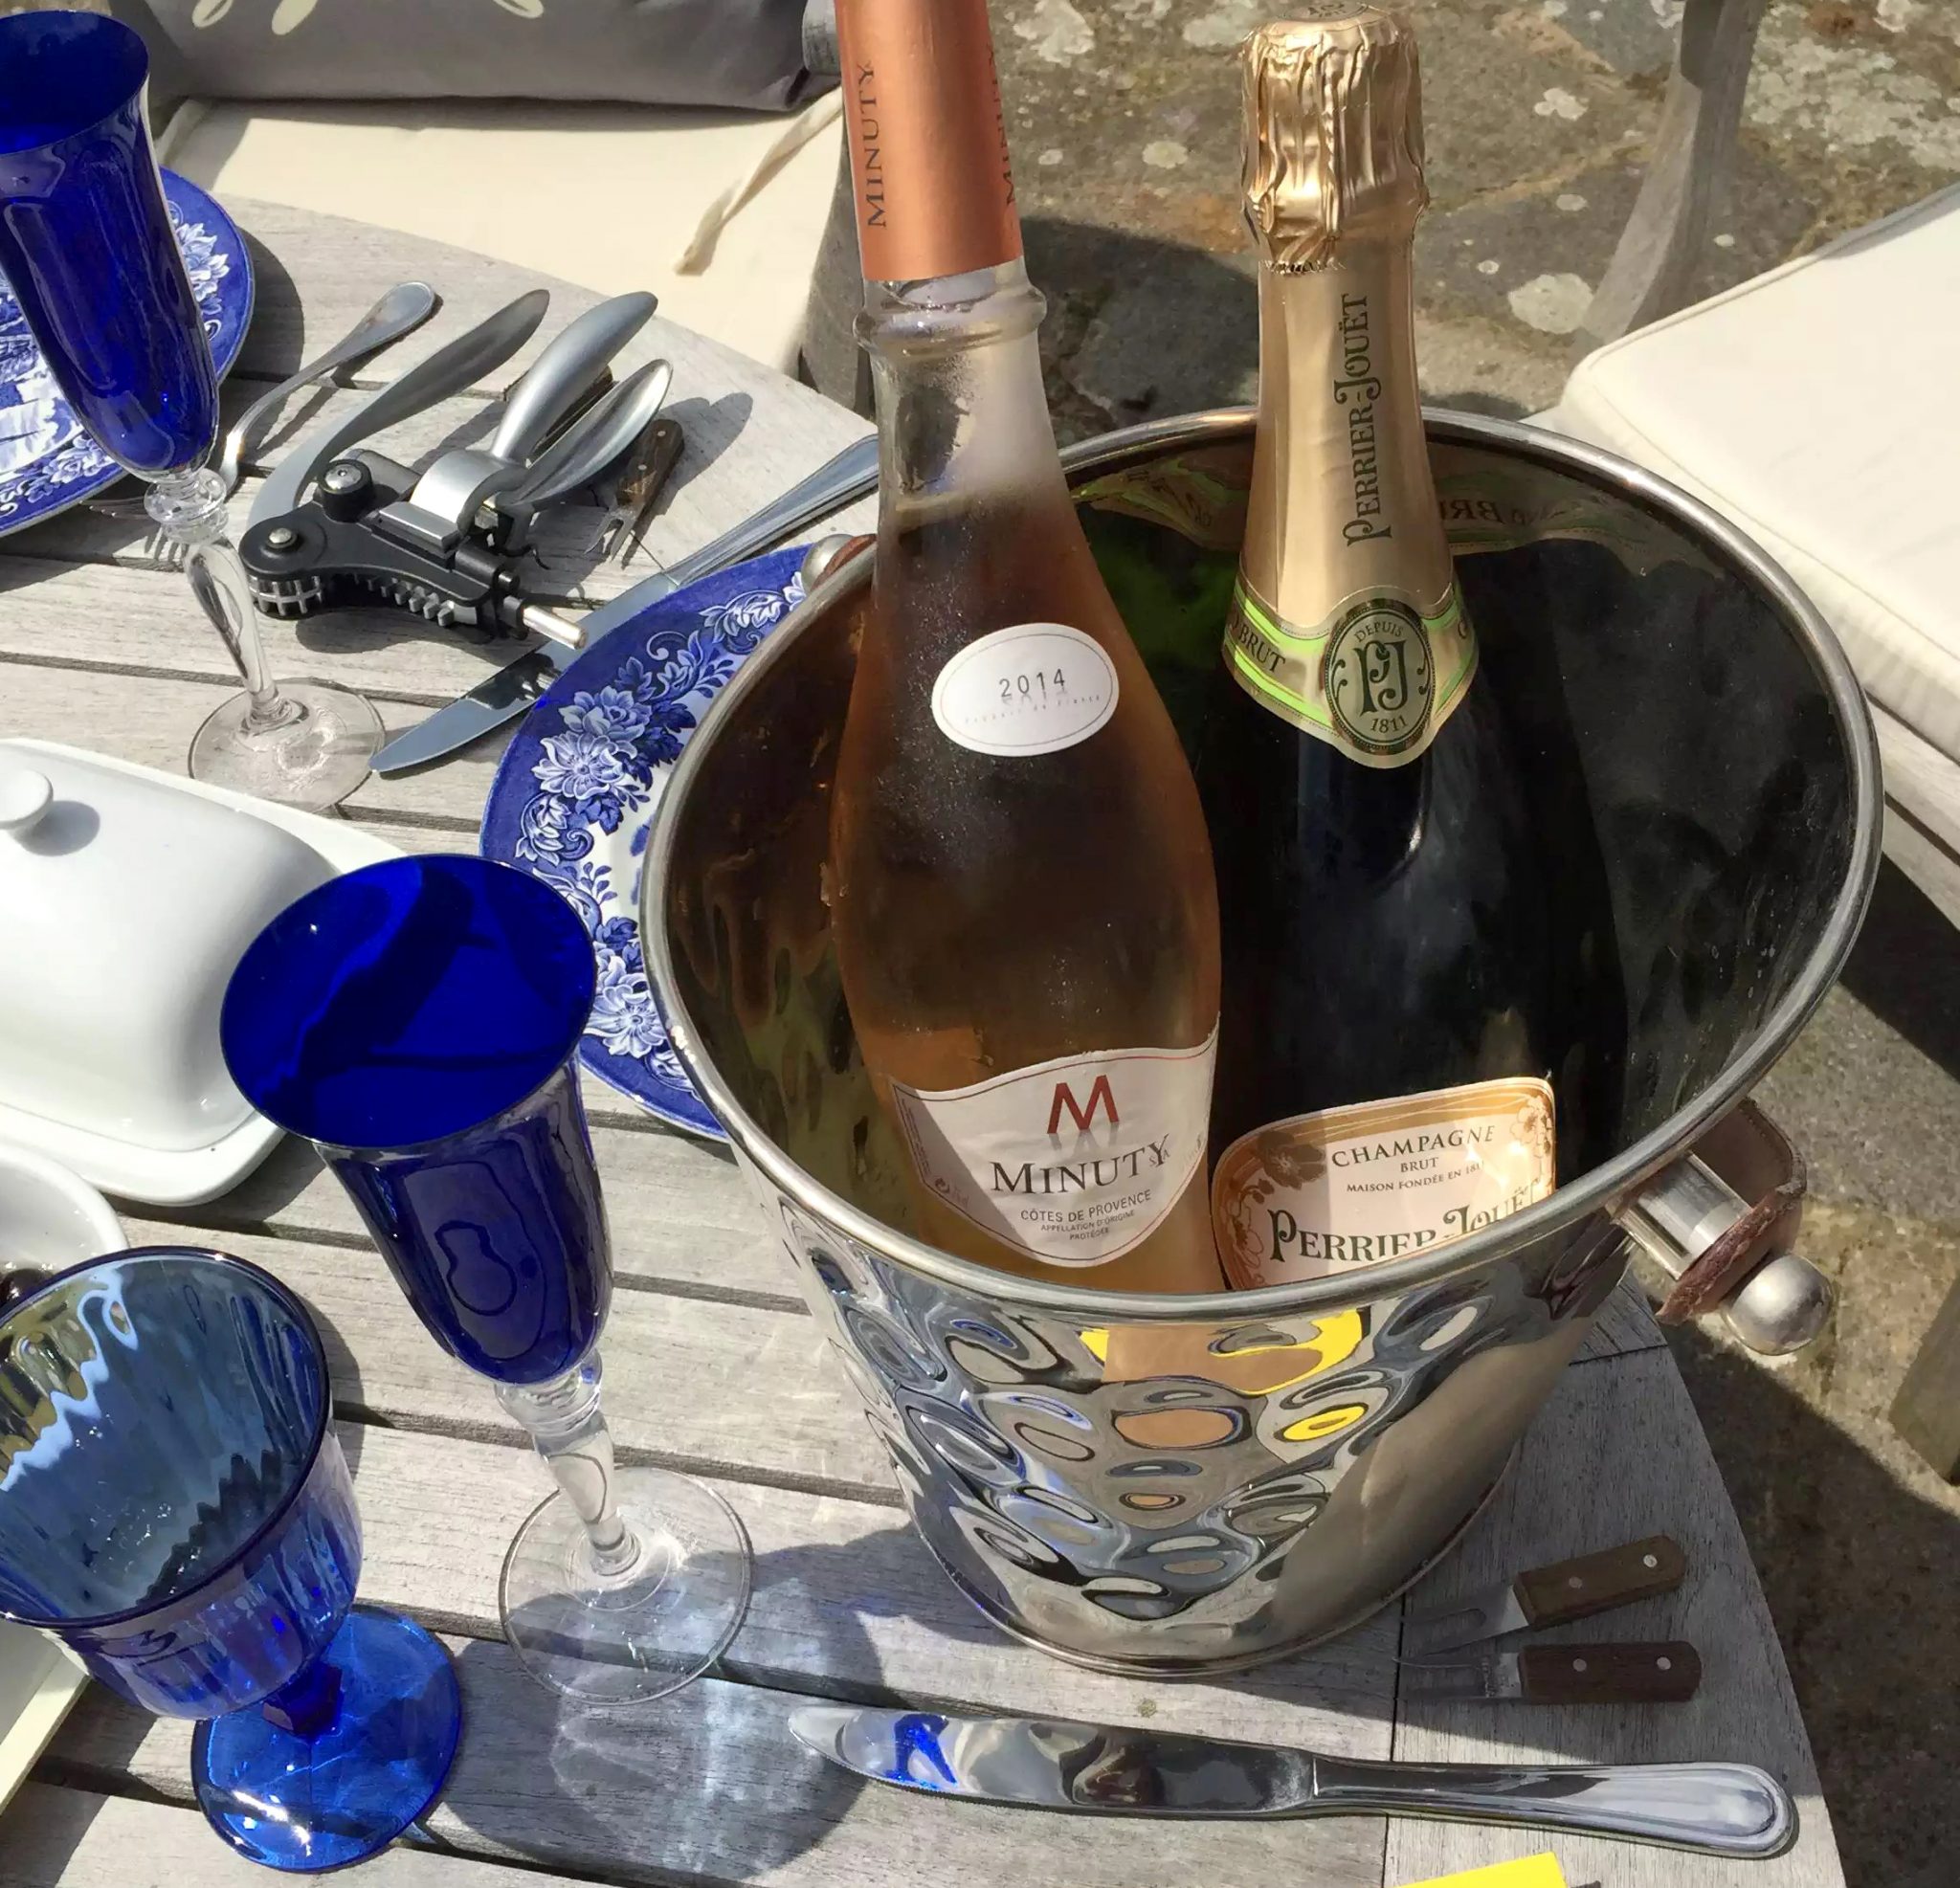 Fathers Day BBQ Marleys Family Sunshine Outdoor Dining Garden Celebration Meat Salads BBQ Lunch Healthy Perrier Jouer Minuty Champagne Rose Wine